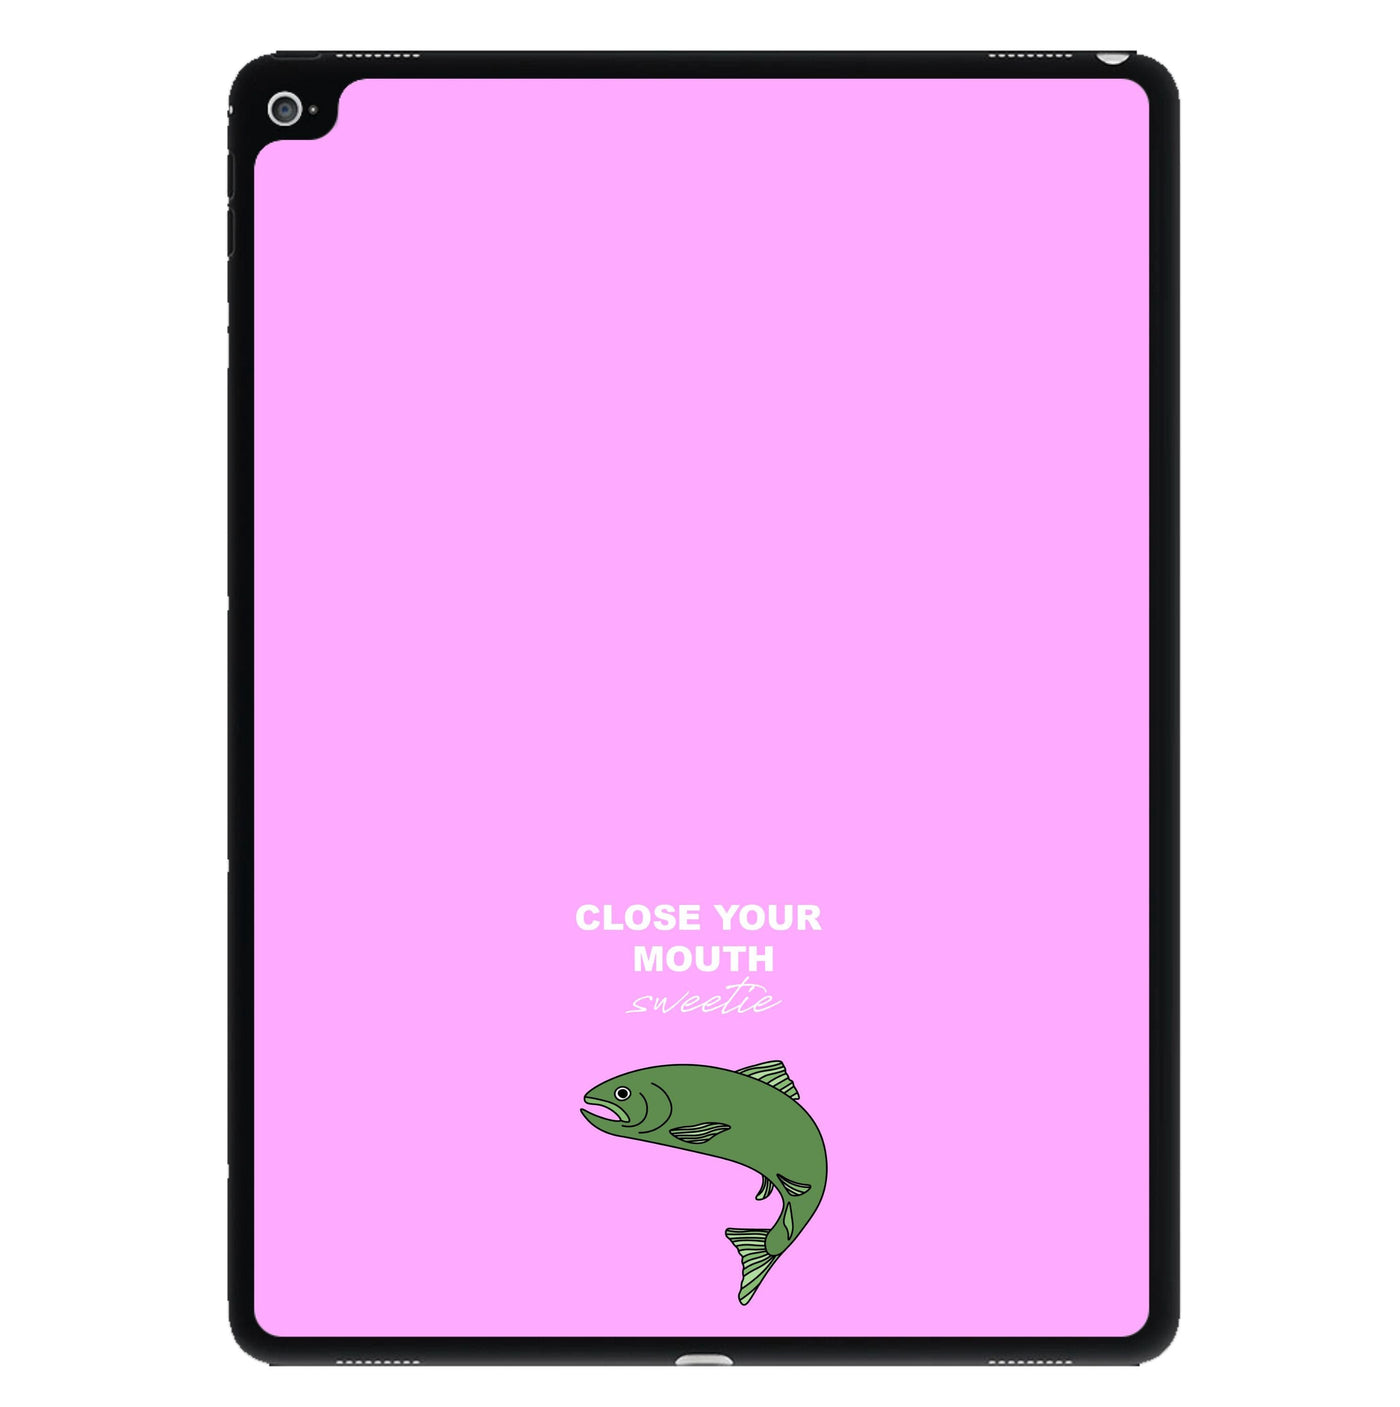 Close Your Mouth - The Office iPad Case